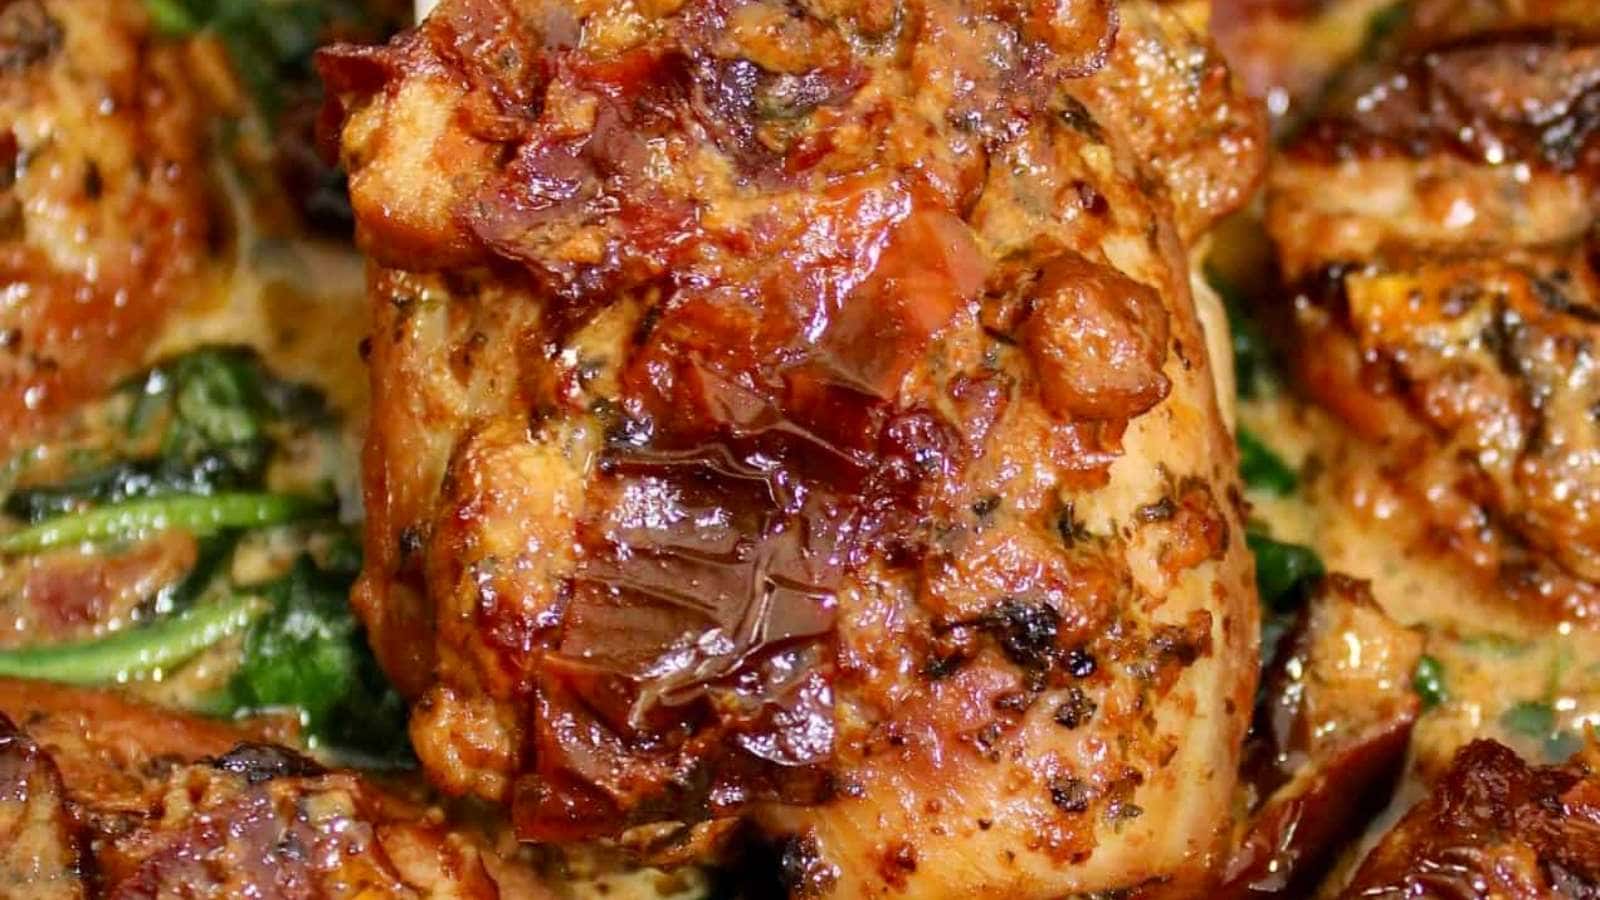 A close up of a dish with chicken and spinach.